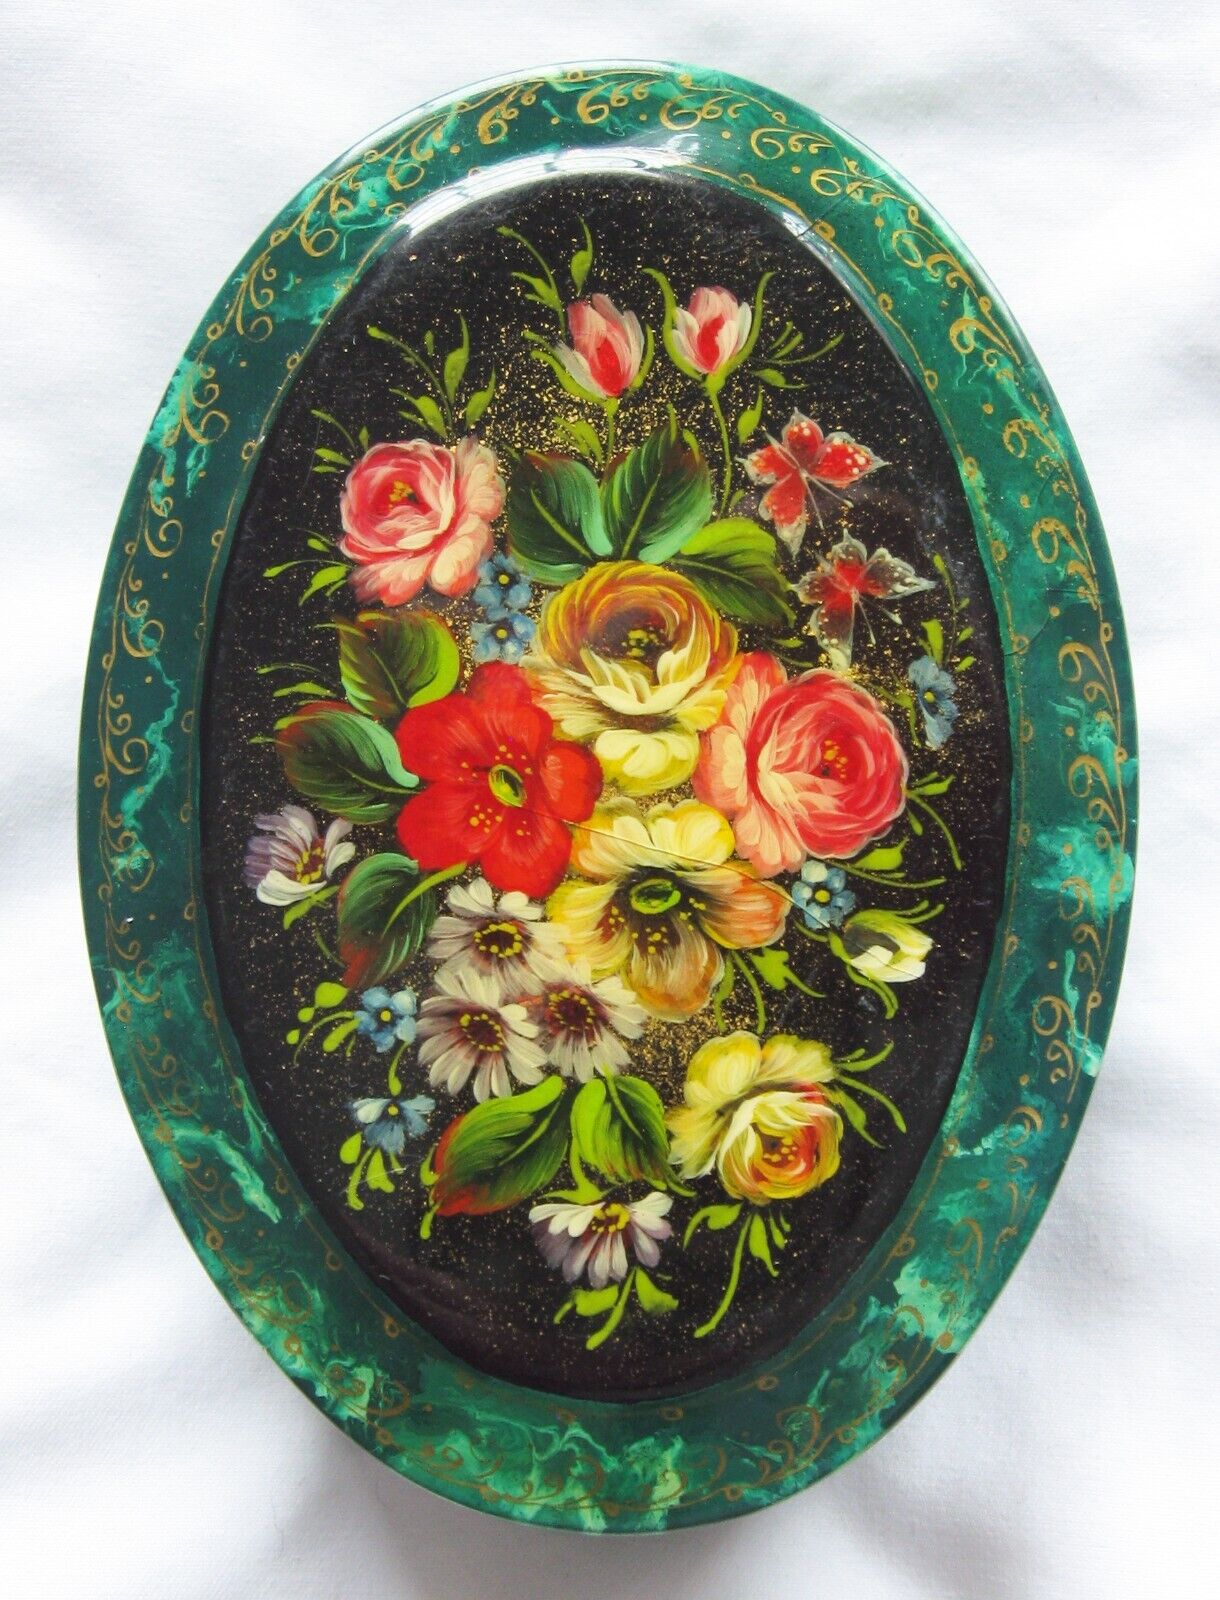 Vintage Russian Signed Hand Painted Lacquer Box - From Ashville VA estate  (A14)